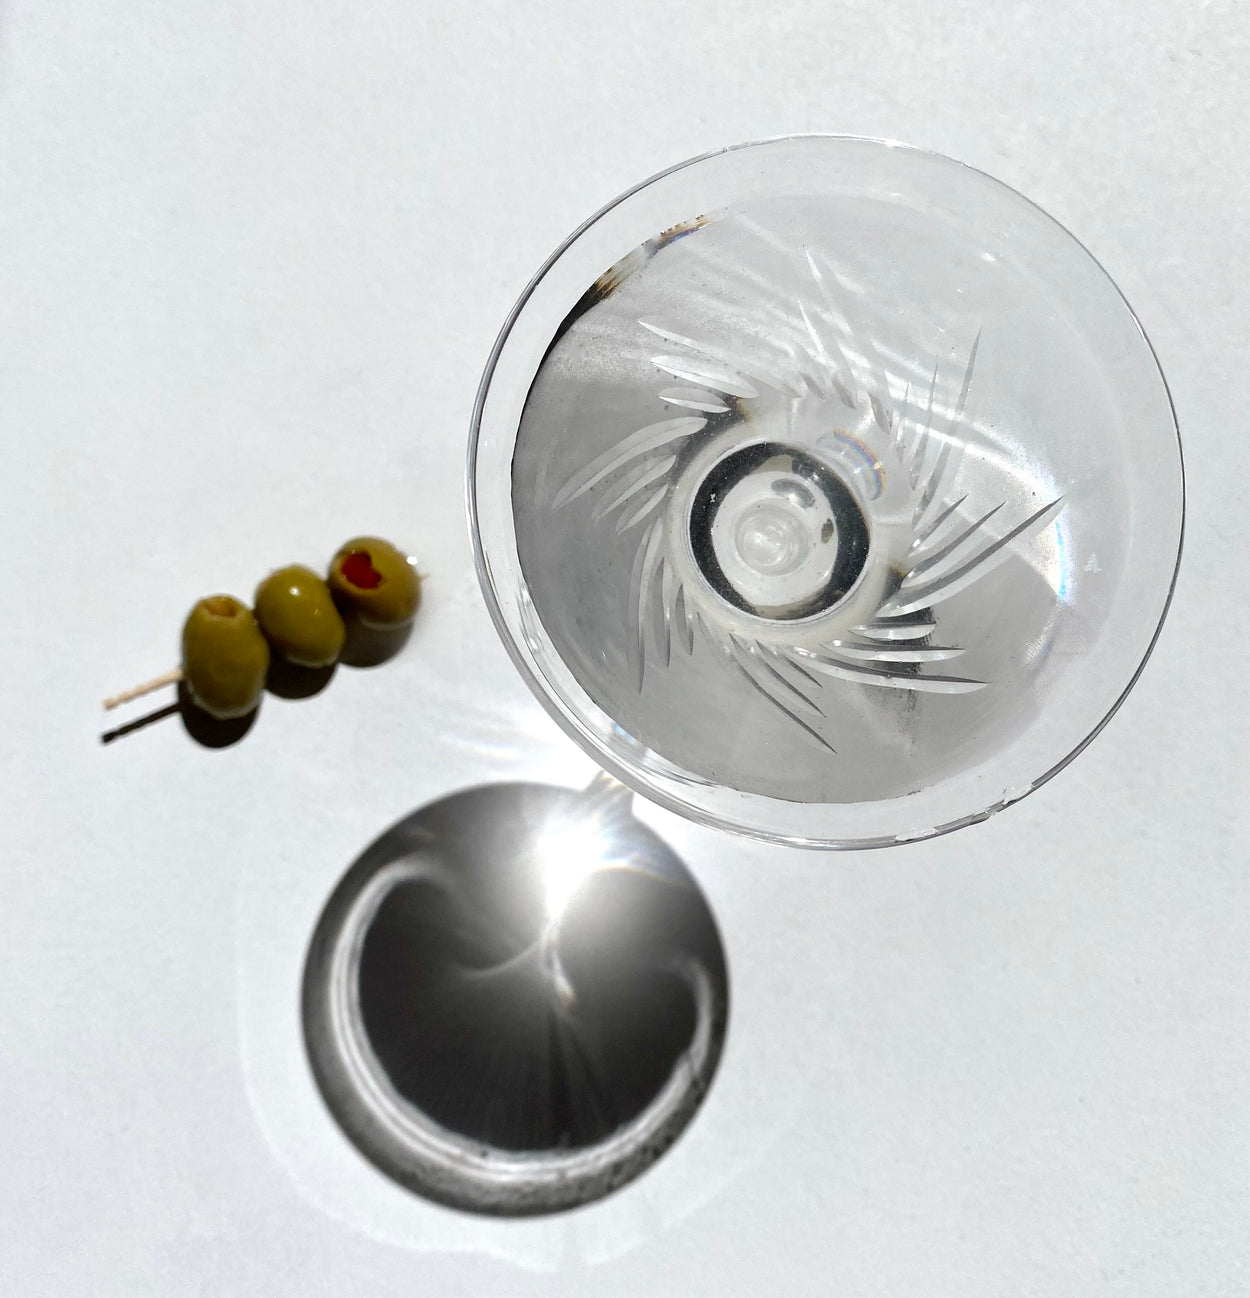 Viewed from above, Japanese martini glass, with olives on pick lying on it's side, against white backdrop